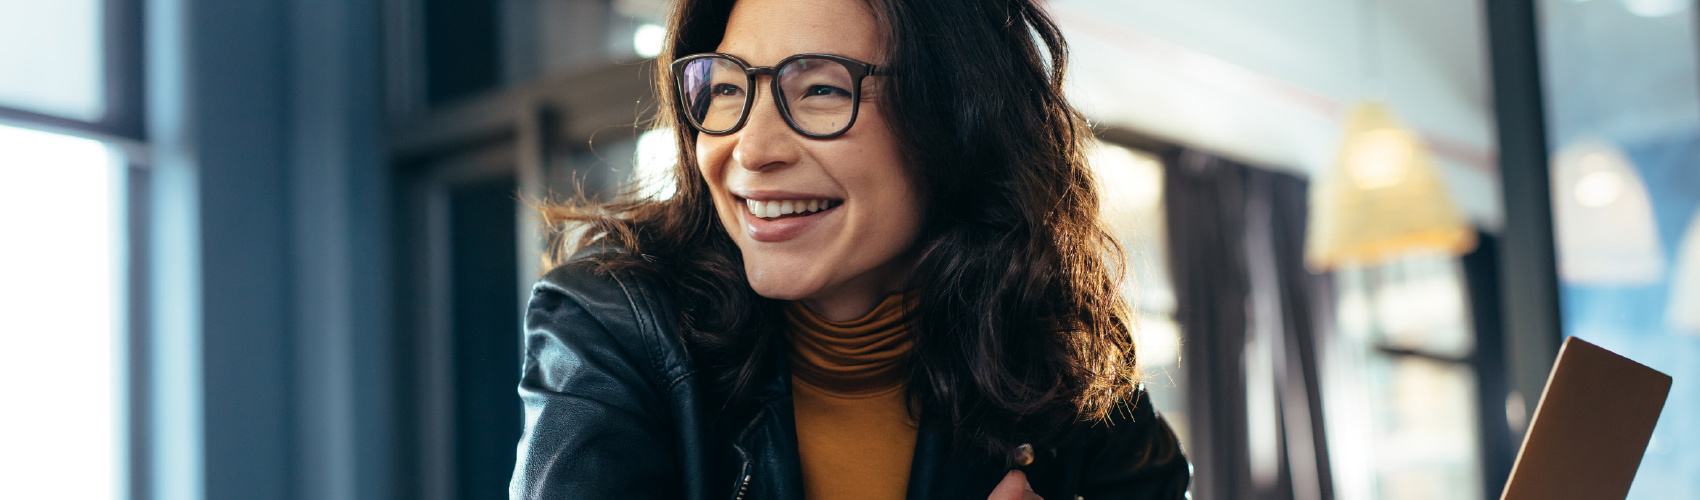 person with brown, curly hear and large-frame glasses looking away from the camera and smiling